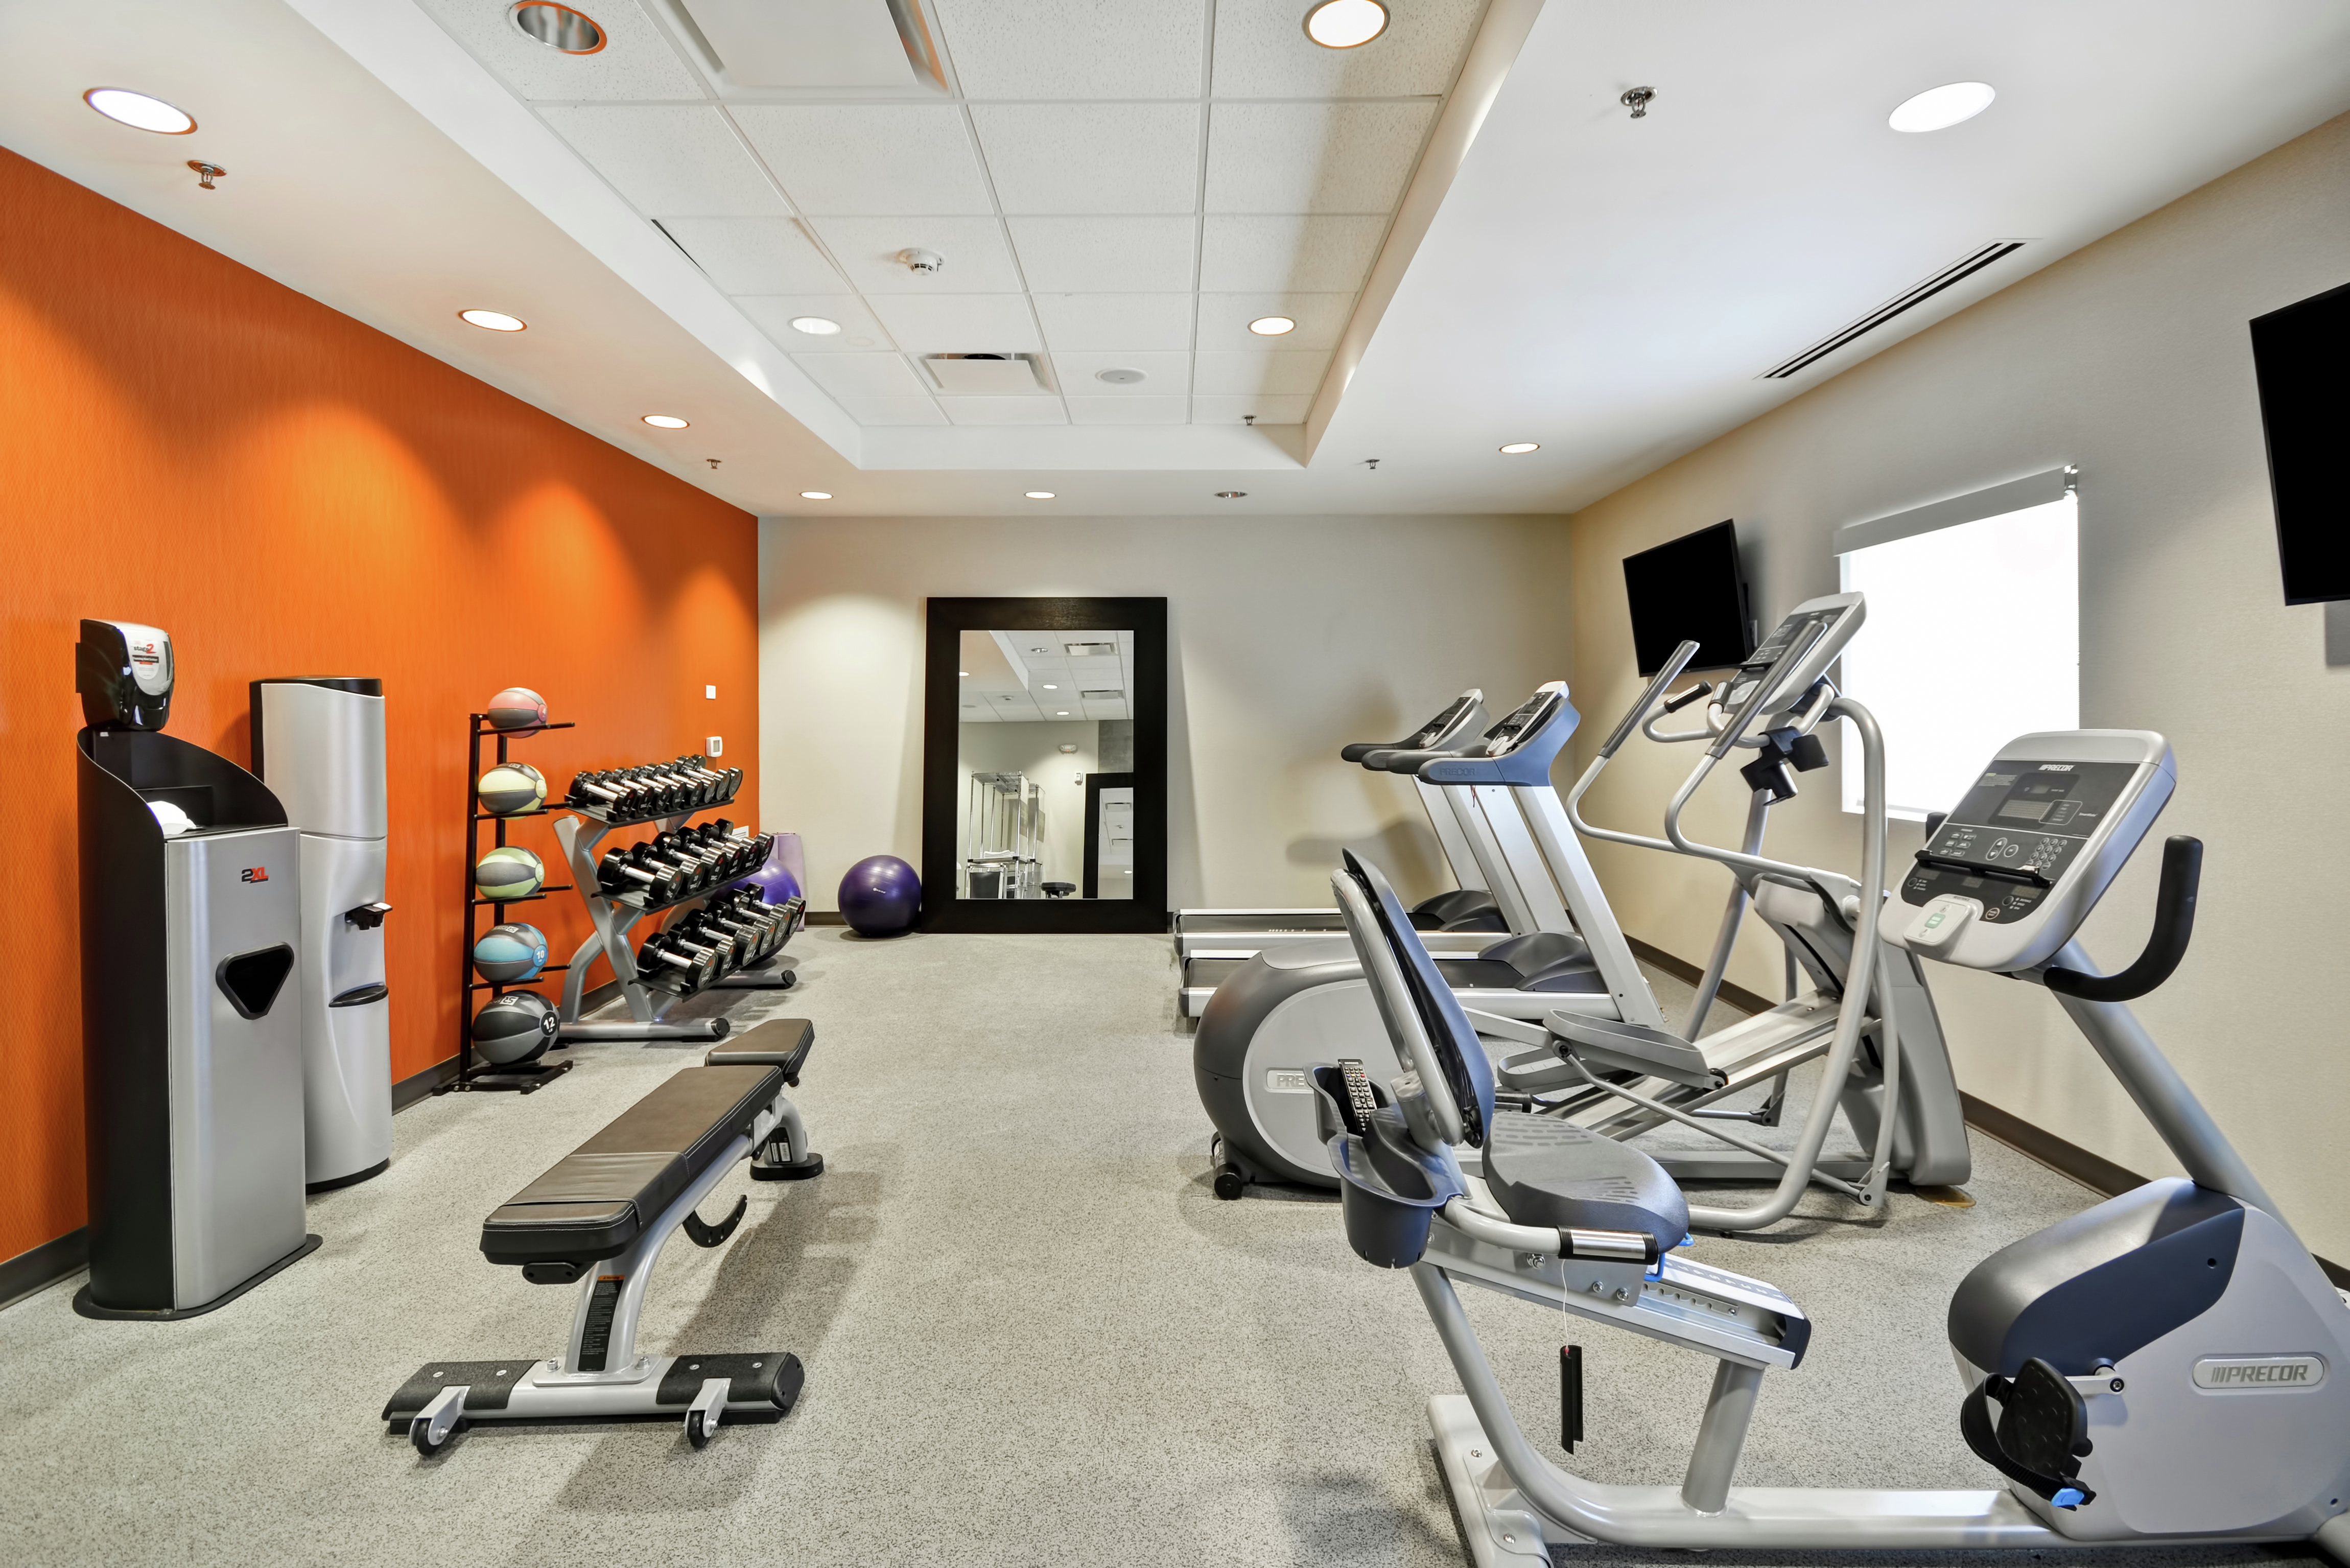 Fitness Center with Treadmills Weights and Exercise Bikes